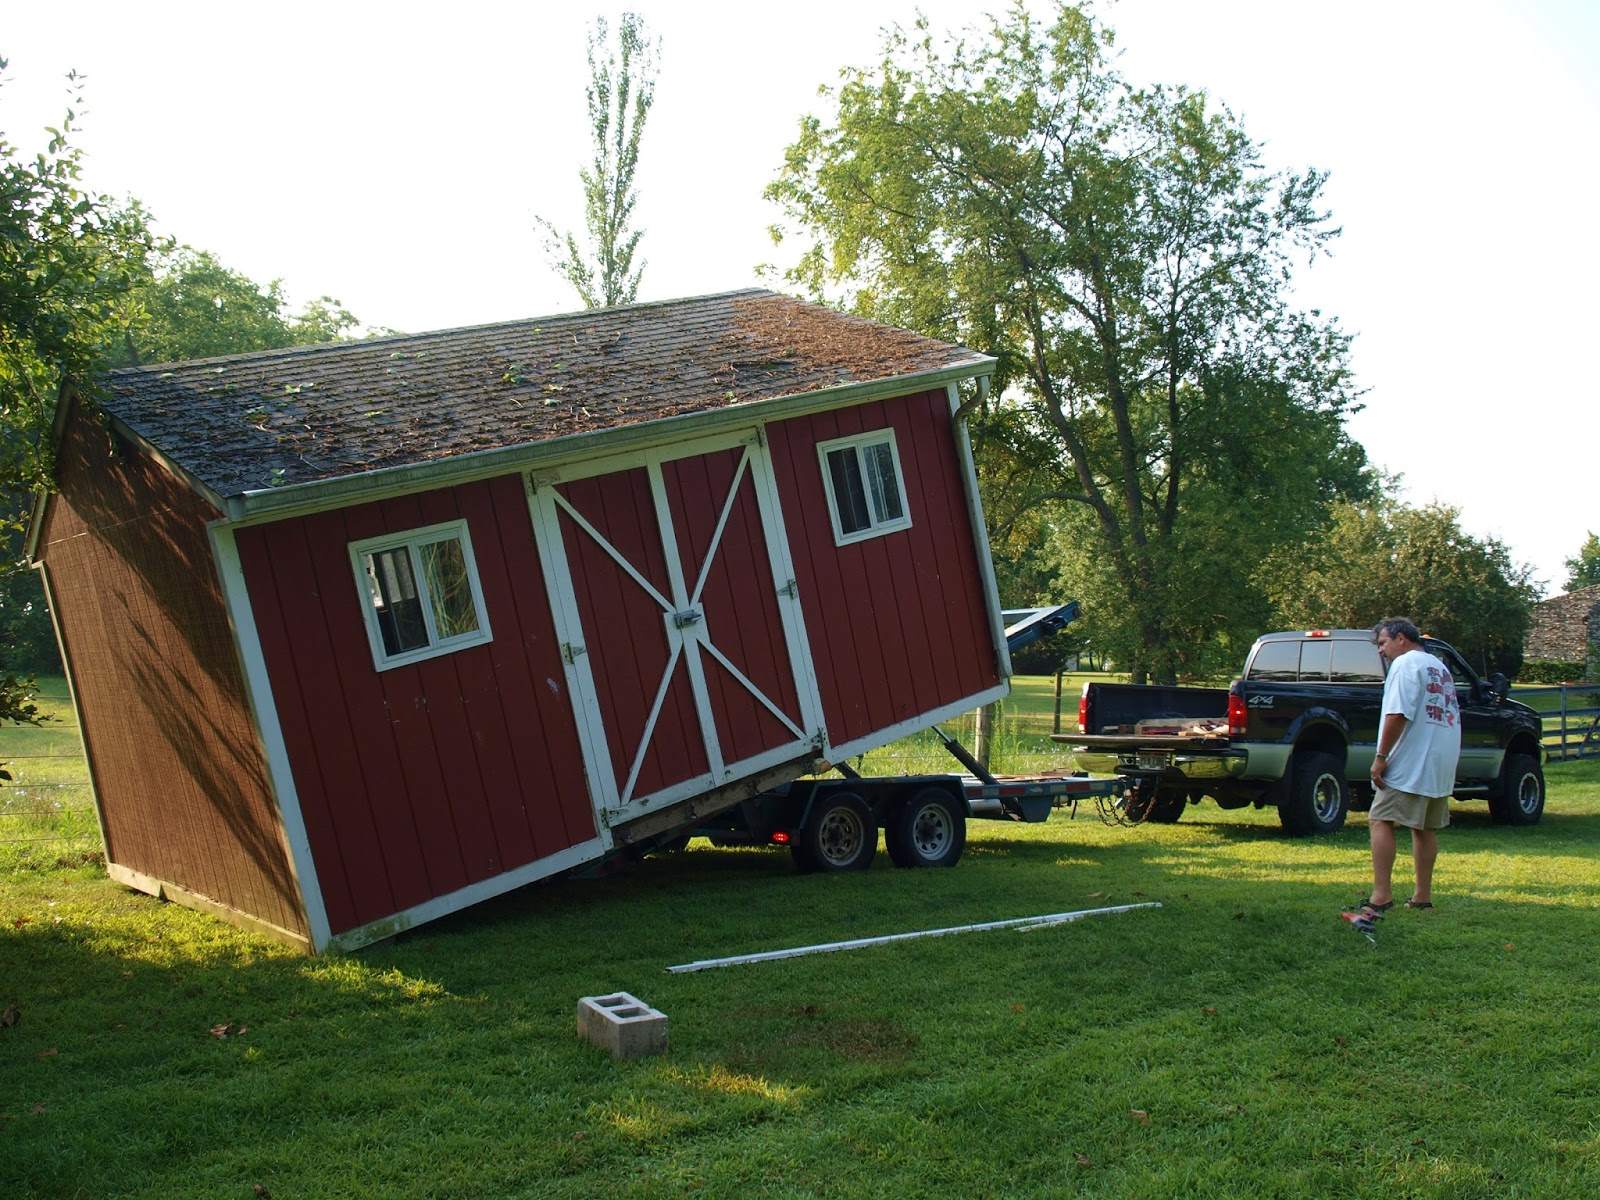 How To Move Shed In Backyard